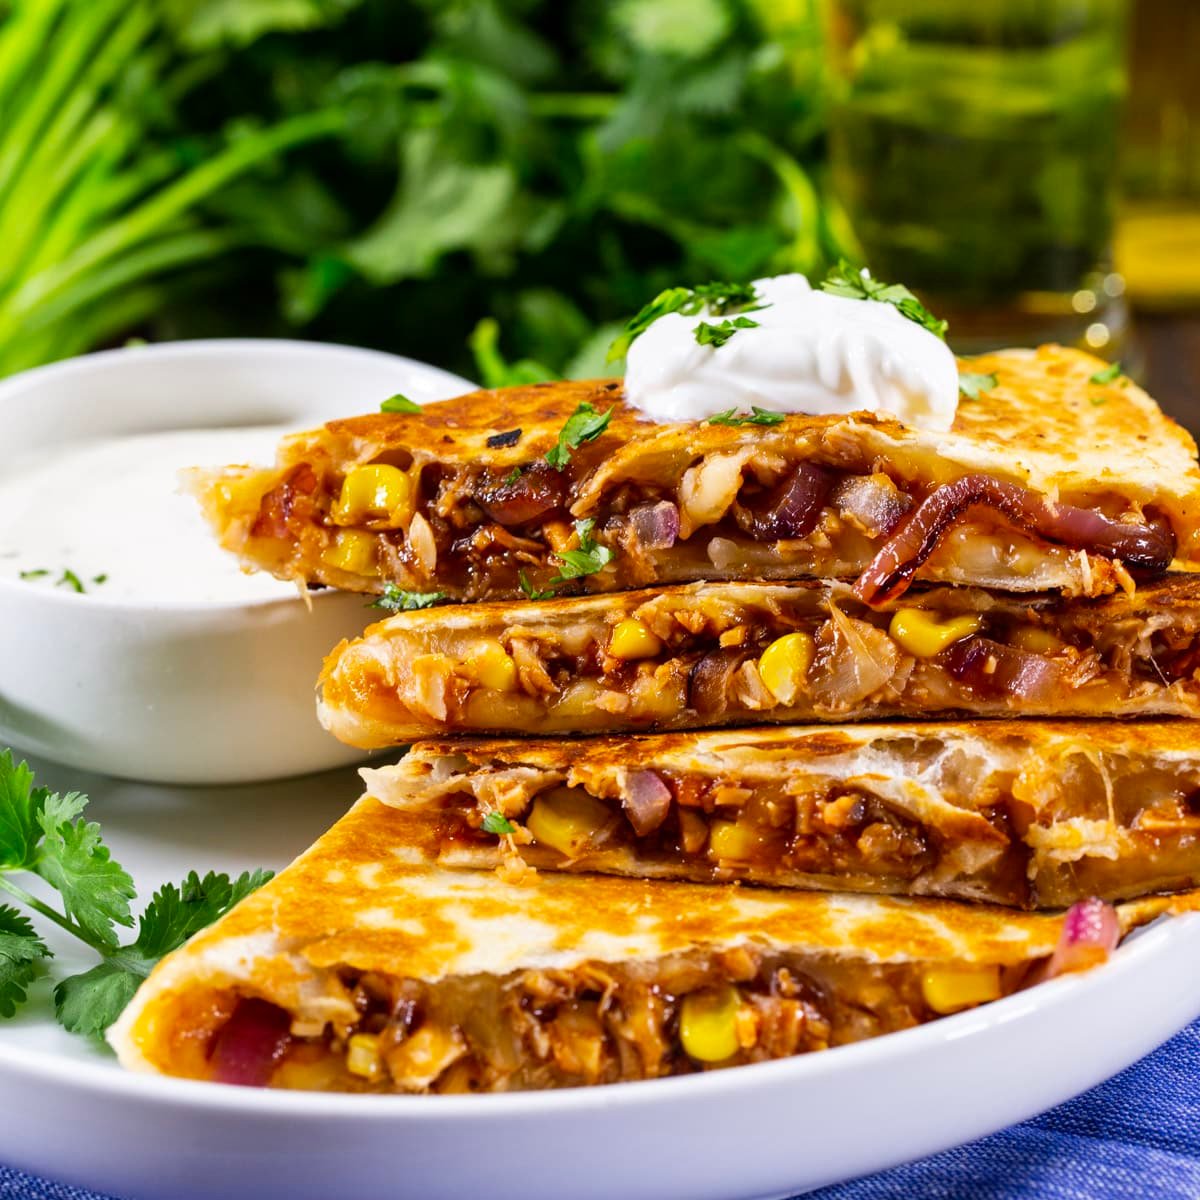 BBQ Chicken Quesadilla chopped  into wedges and topped with sour cream.